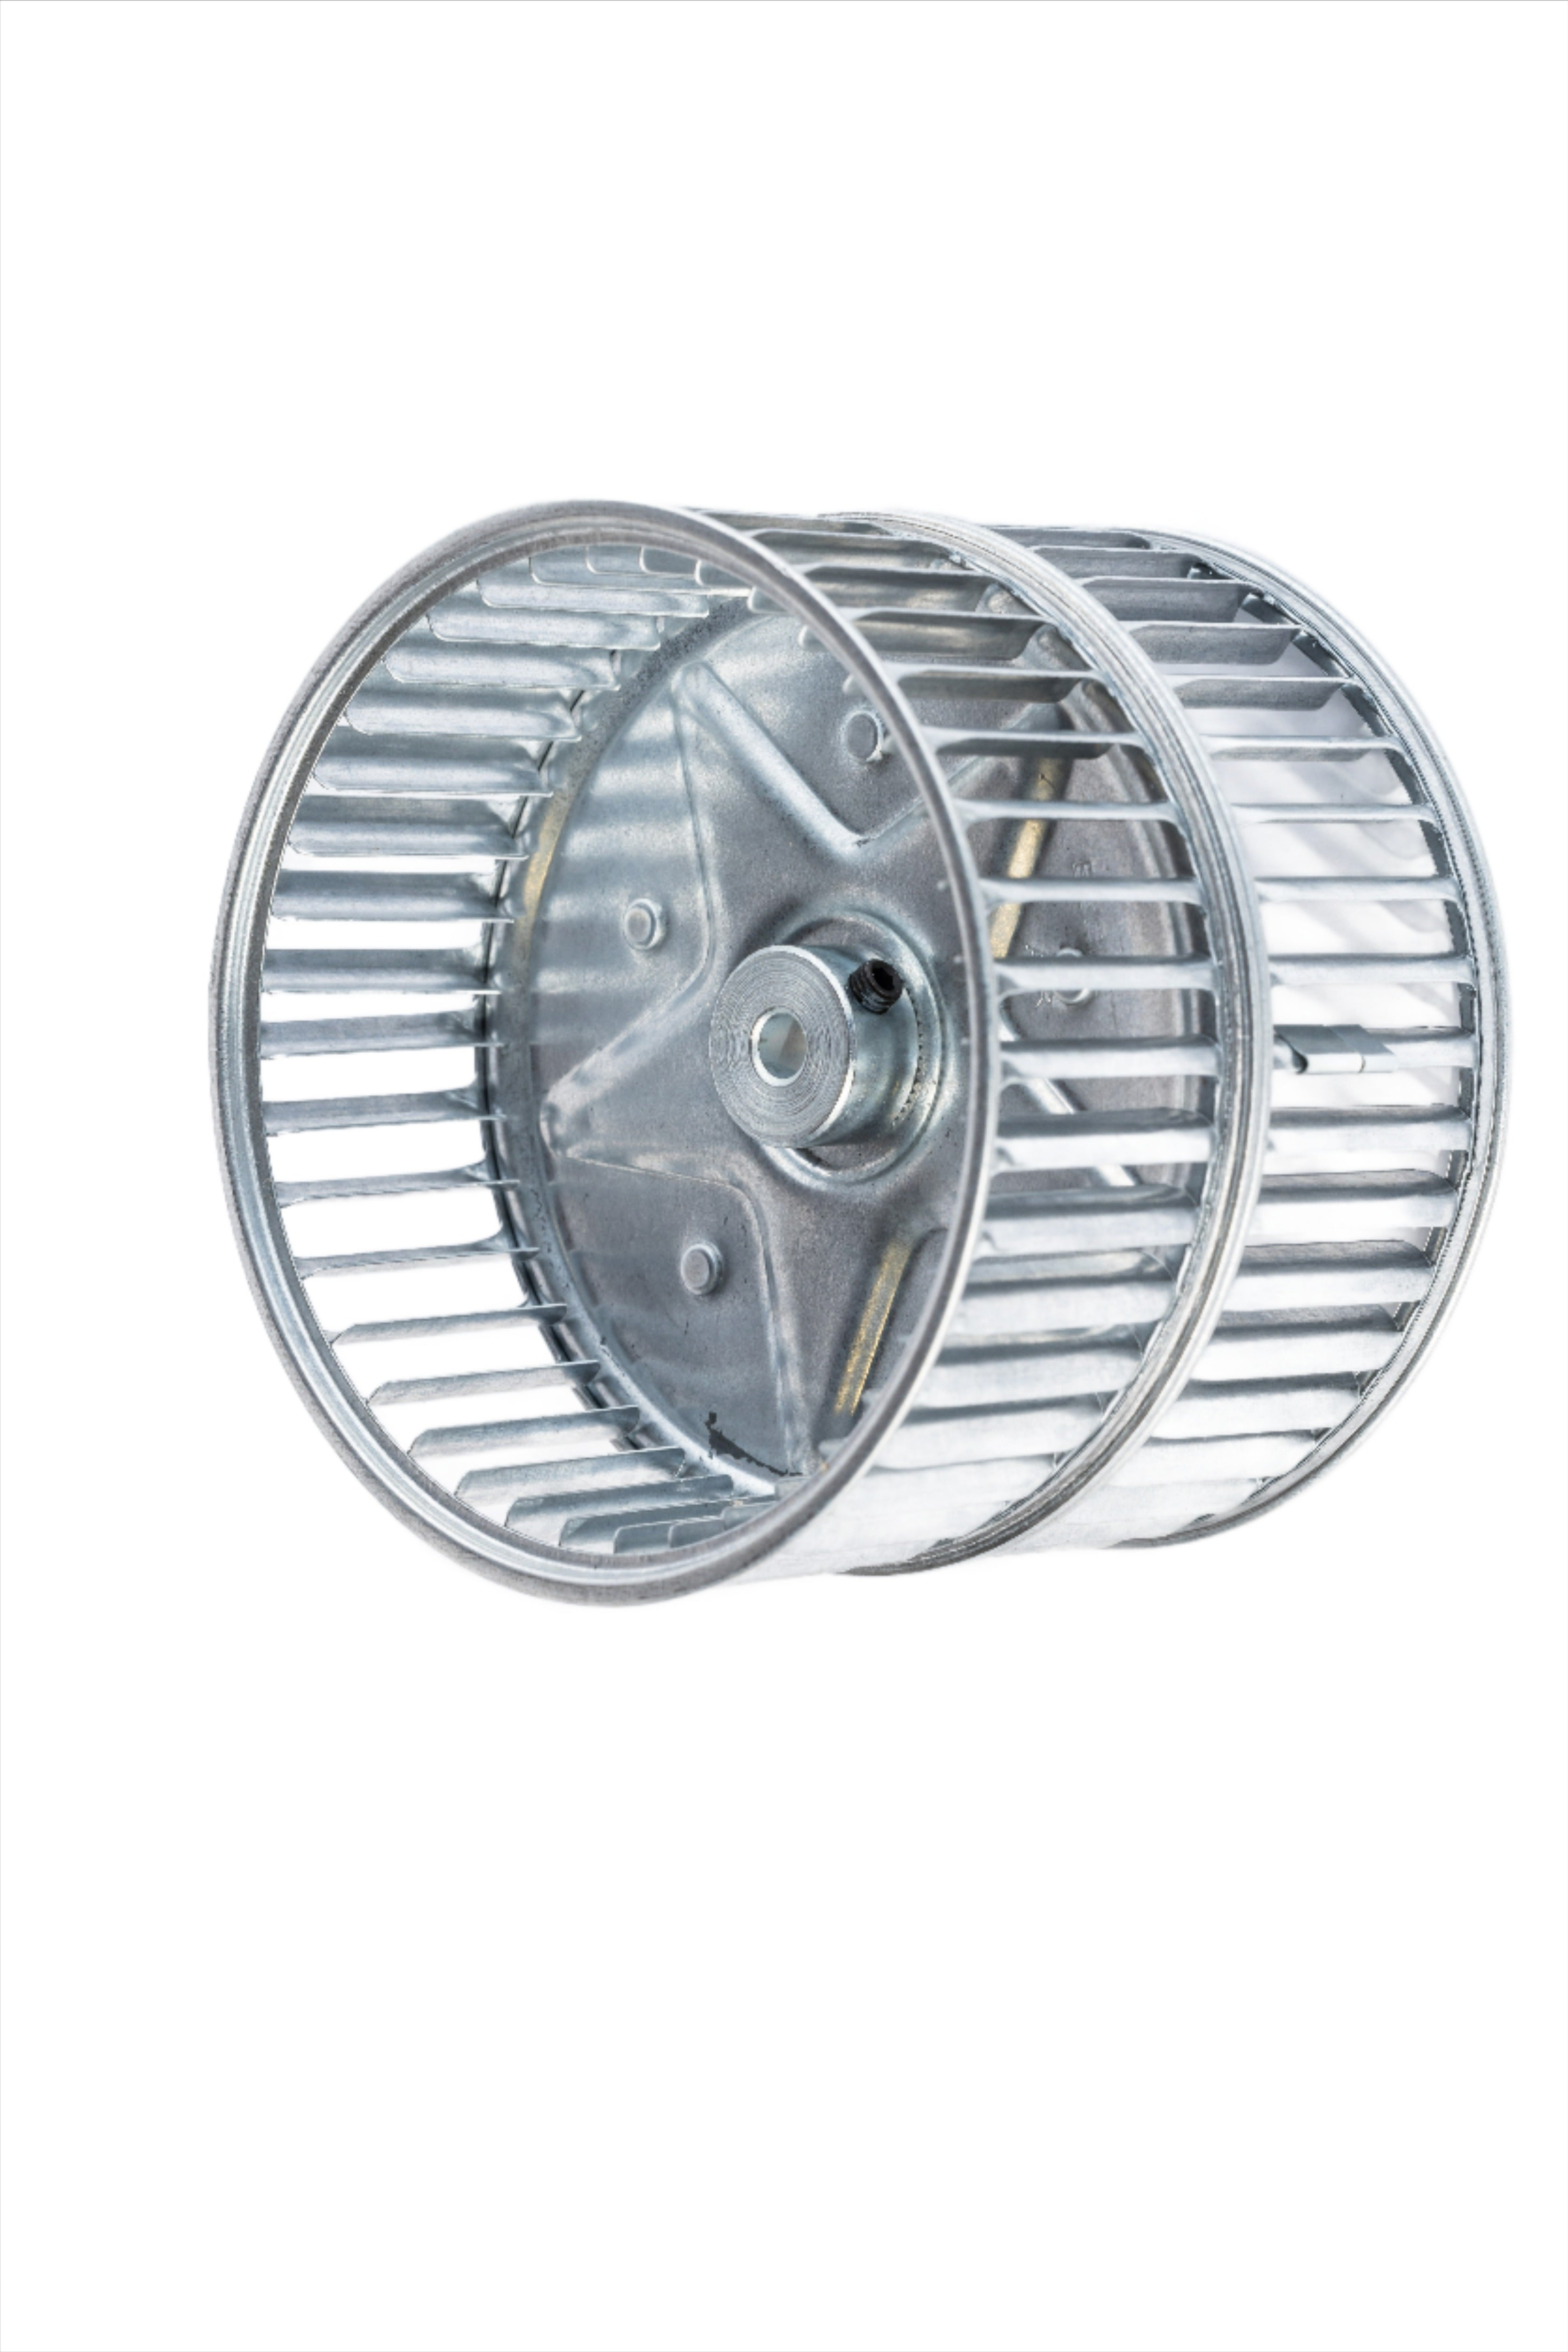 Fan Wheel Double Entry For Red Dot R-5045 Units 73R7151